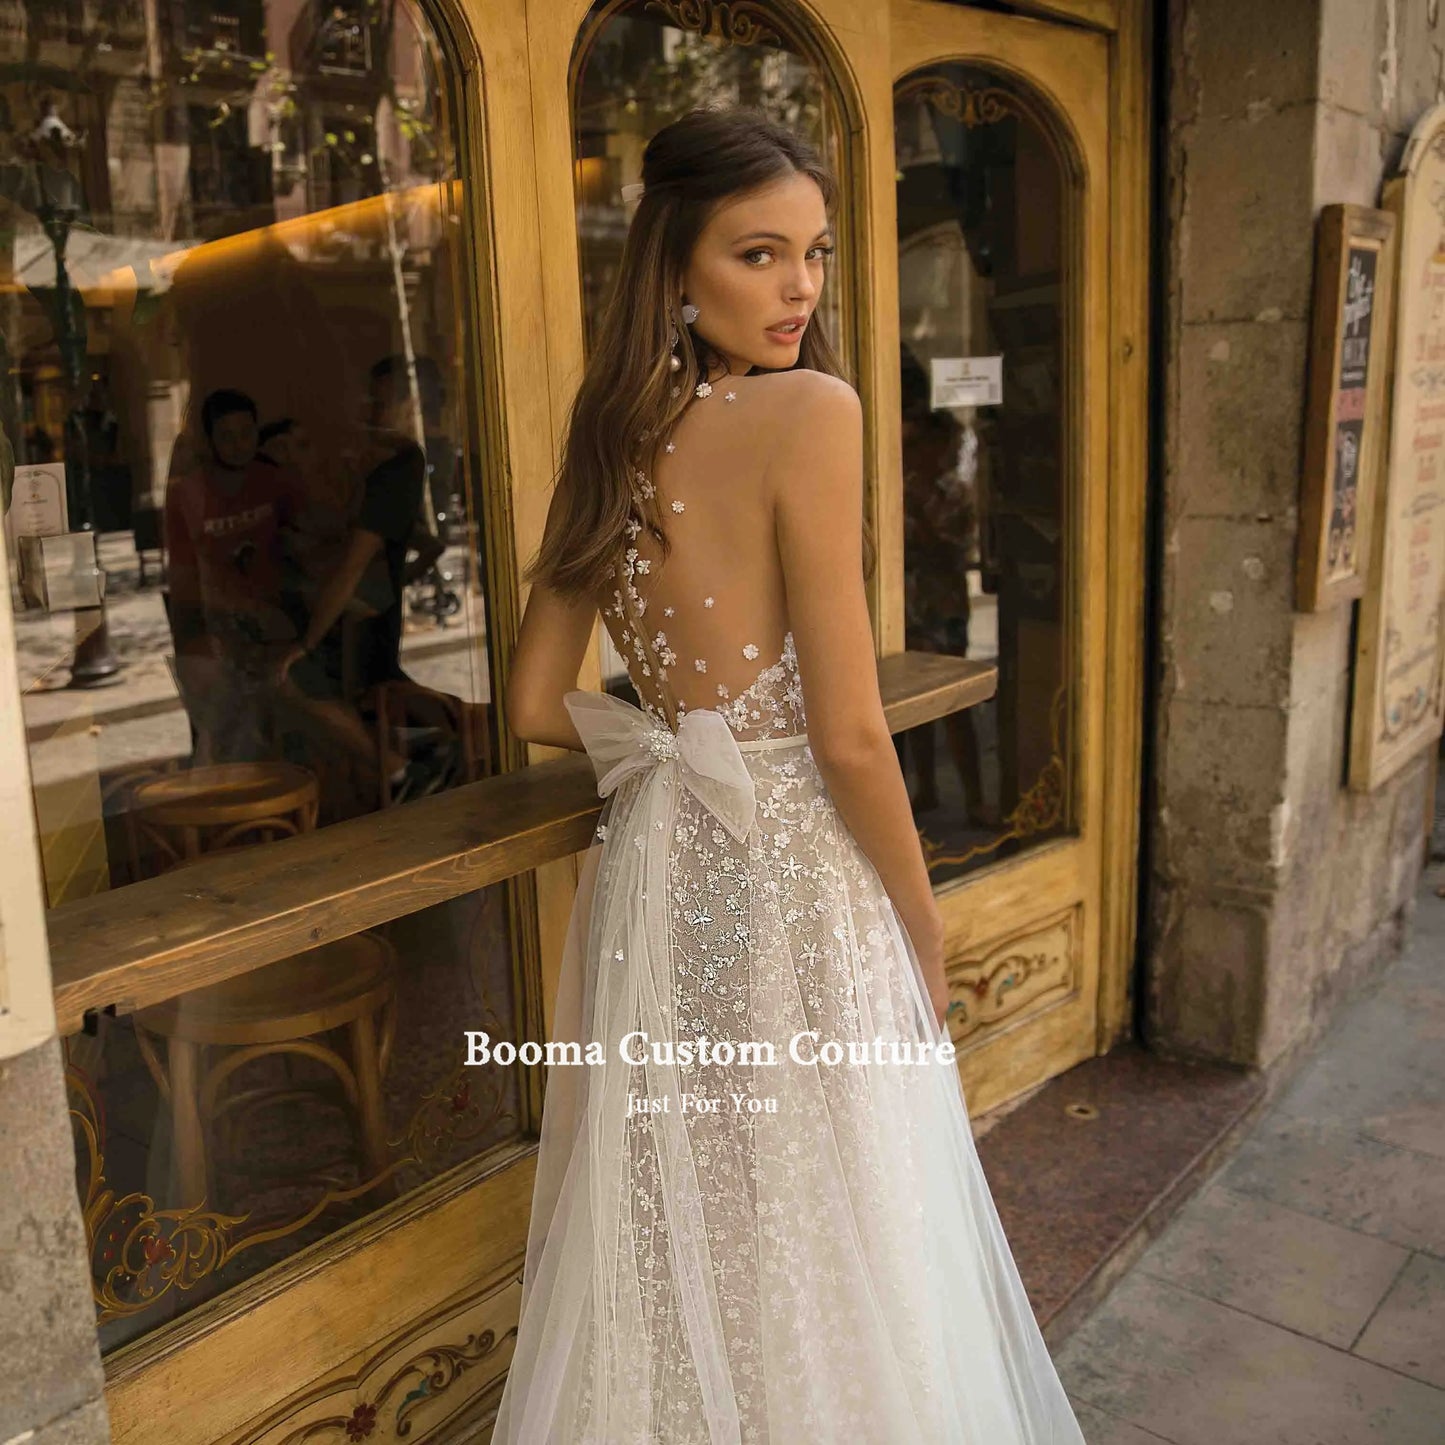 Delicate Lace Beach Wedding Dresses Plunging Neckline Illusion Boho Bride Dresses Bow Back A-Line Tulle Wedding Gowns